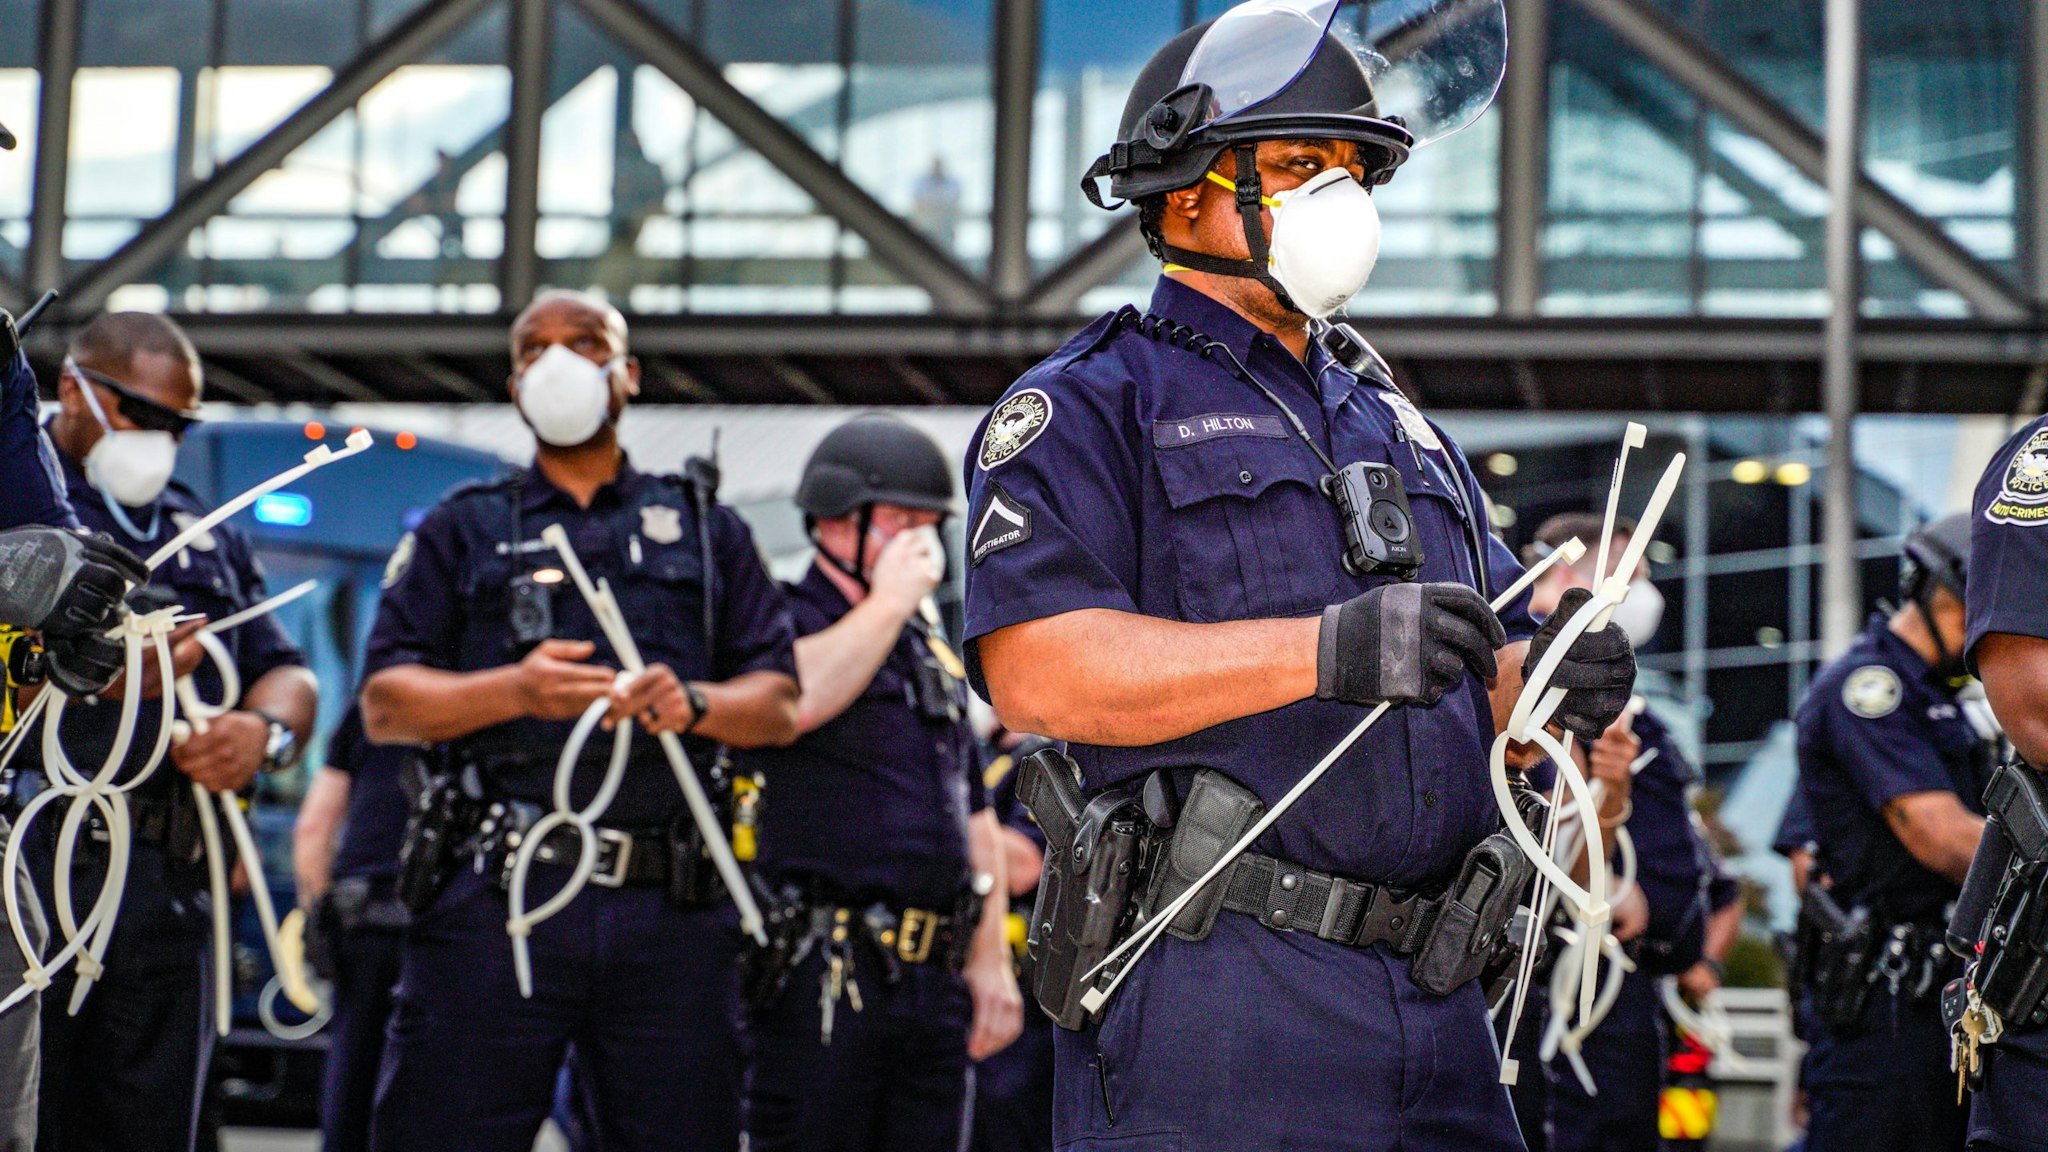 ATLANTA, USA - MAY 29: Police officers stand guard during a protest following the death of George Floyd outside of the CNN Center next to Centennial Olympic Park in downtown Atlanta, Georgia, United States on May 29, 2020. It was announced Friday that Derek Chauvin, the former Minneapolis police officer caught on camera with his knee on Floydâs neck, has been arrested and charged with third-degree murder and manslaughter.